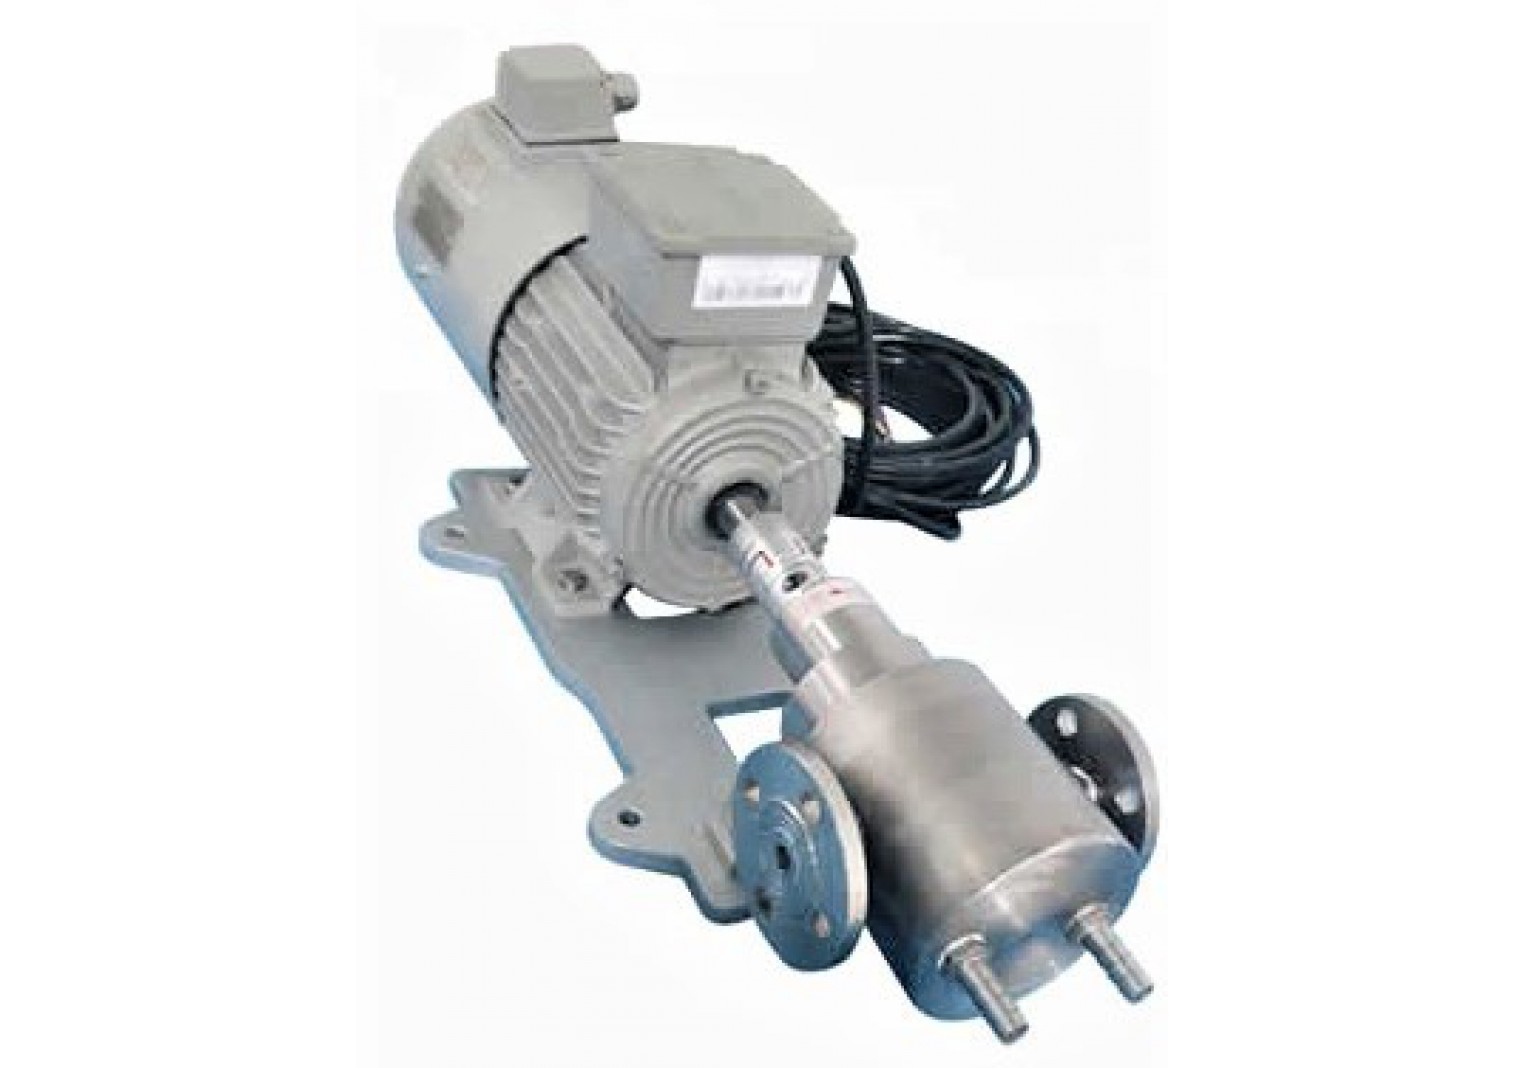 Jacket Gear Pump For Grease JL160